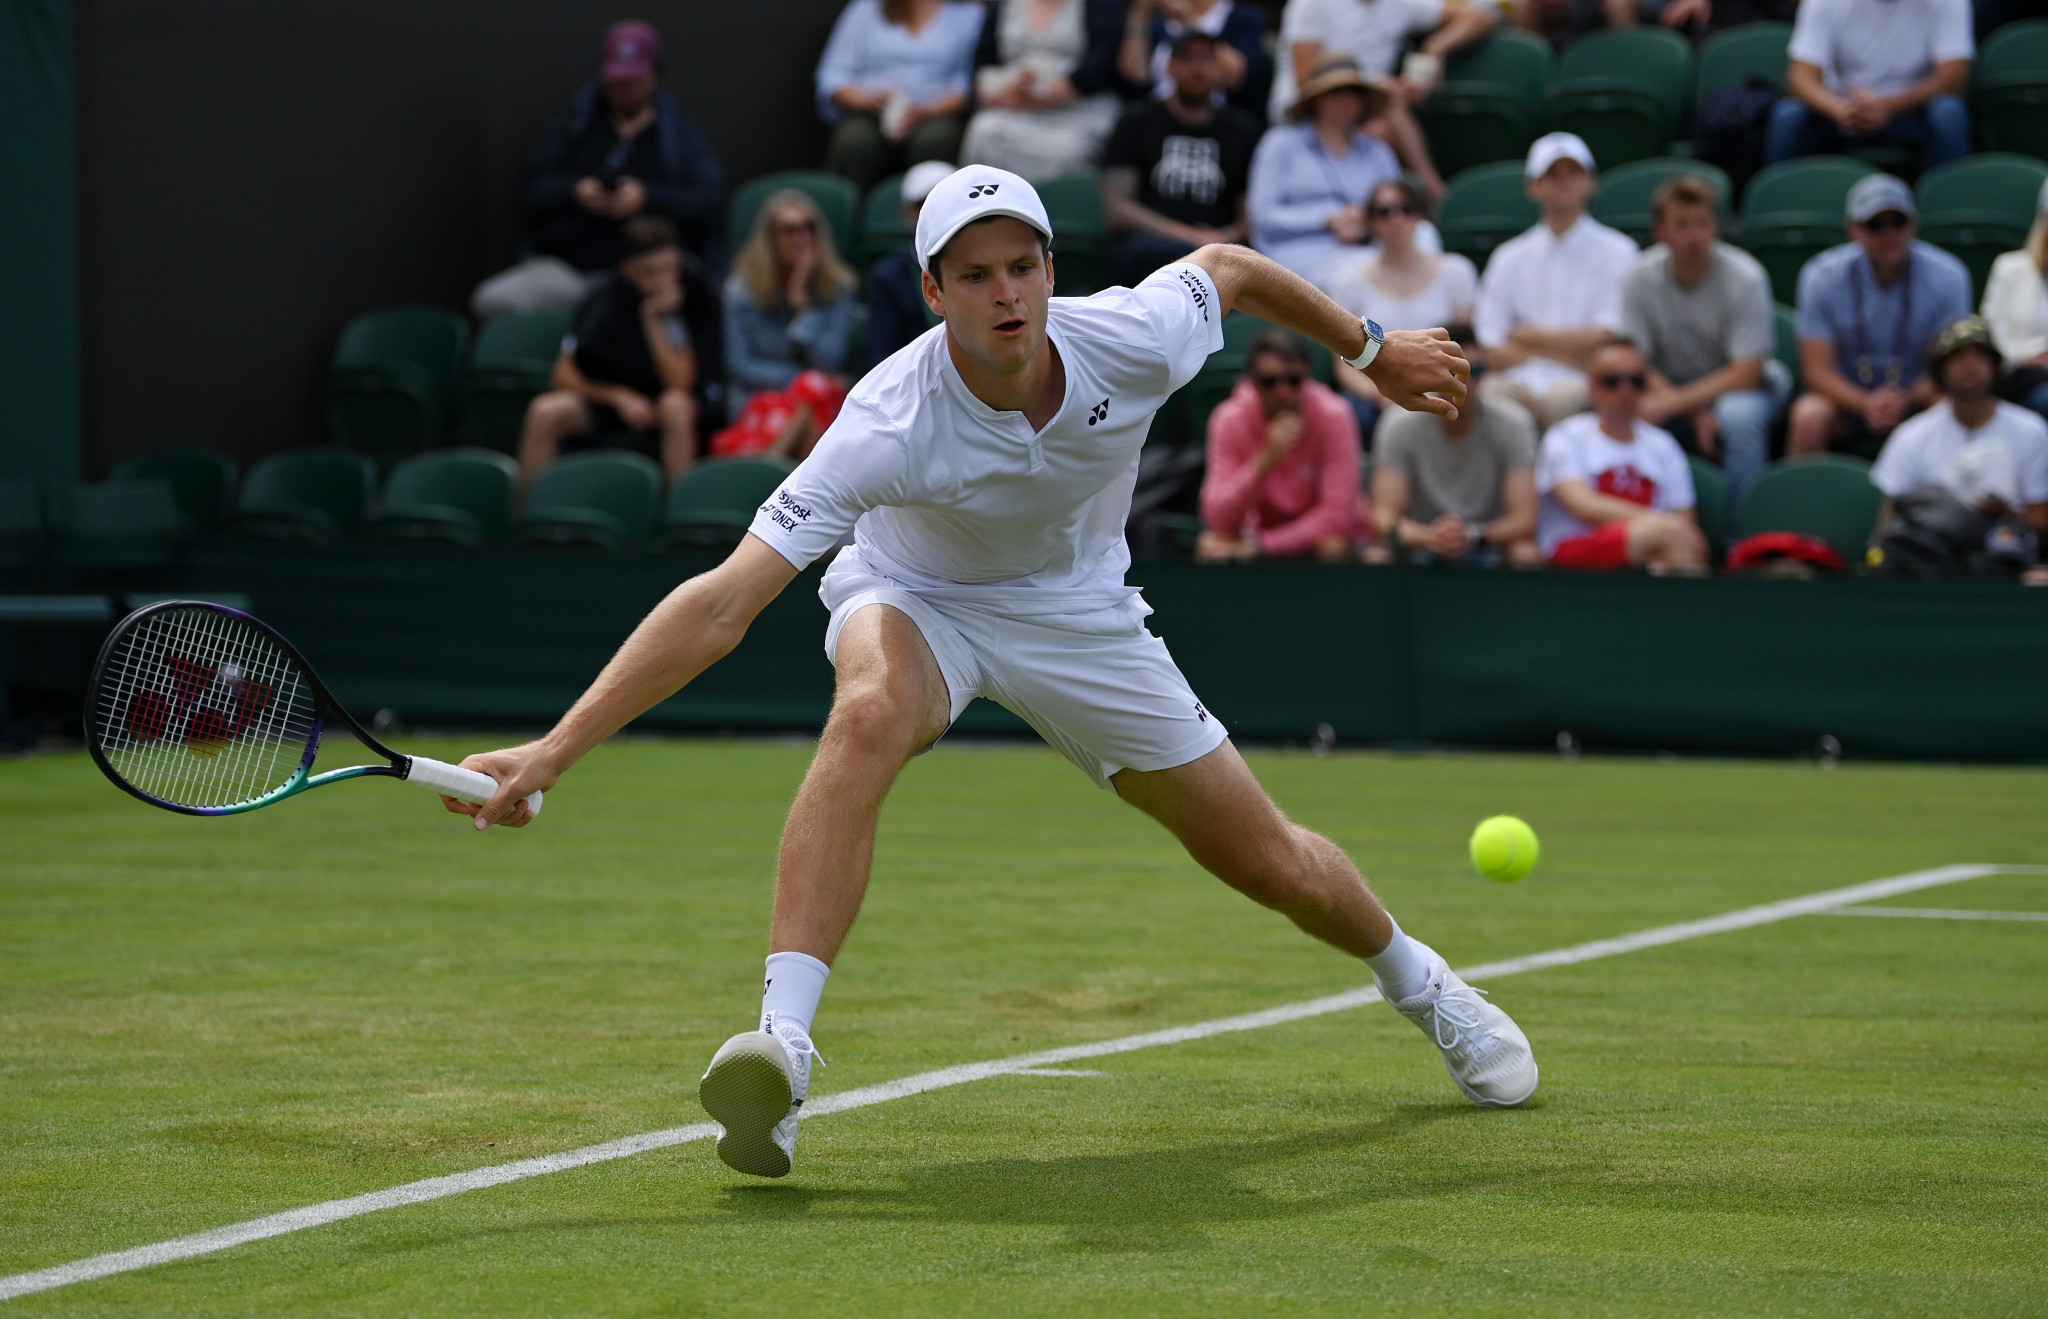 Hubert Hurkacz lost in the men's singles first round at Wimbledon ©Getty Images